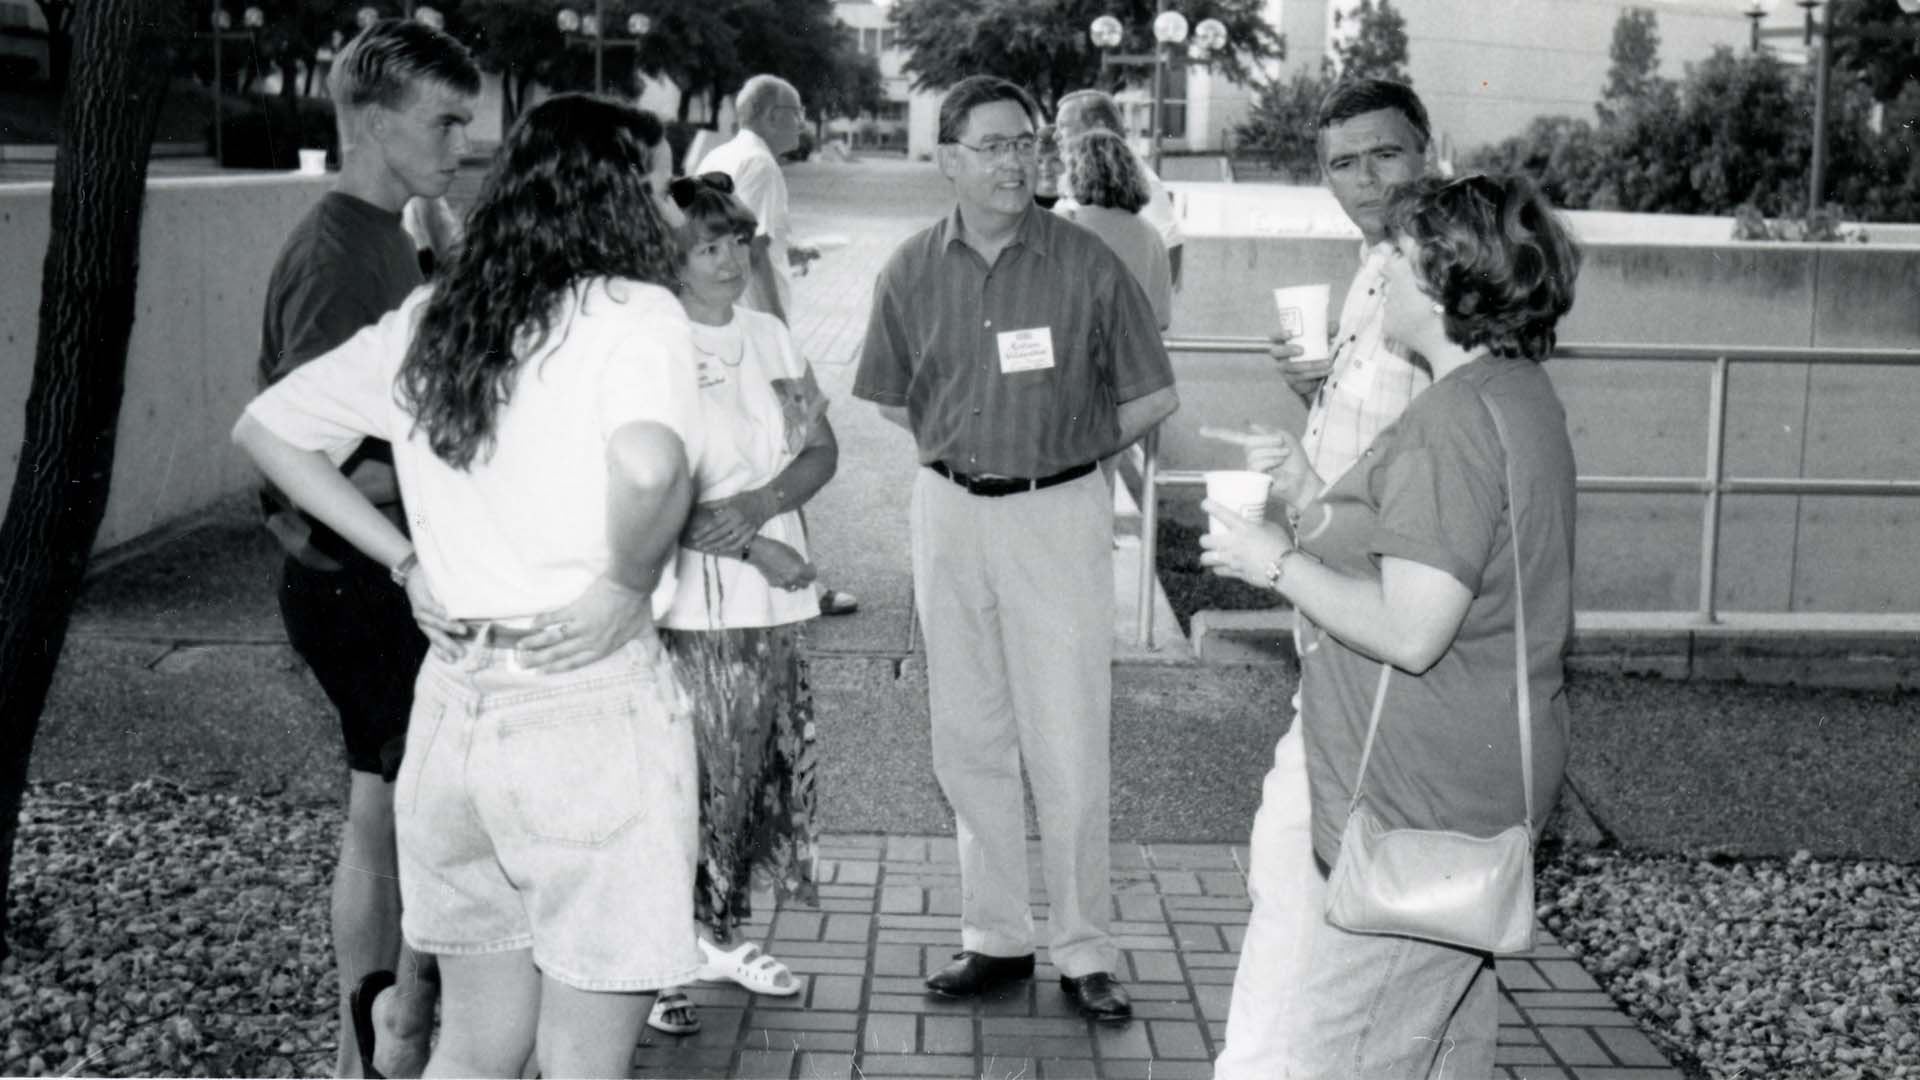 1993 Welcome BBQ. Hobson Wildenthal pictured center.